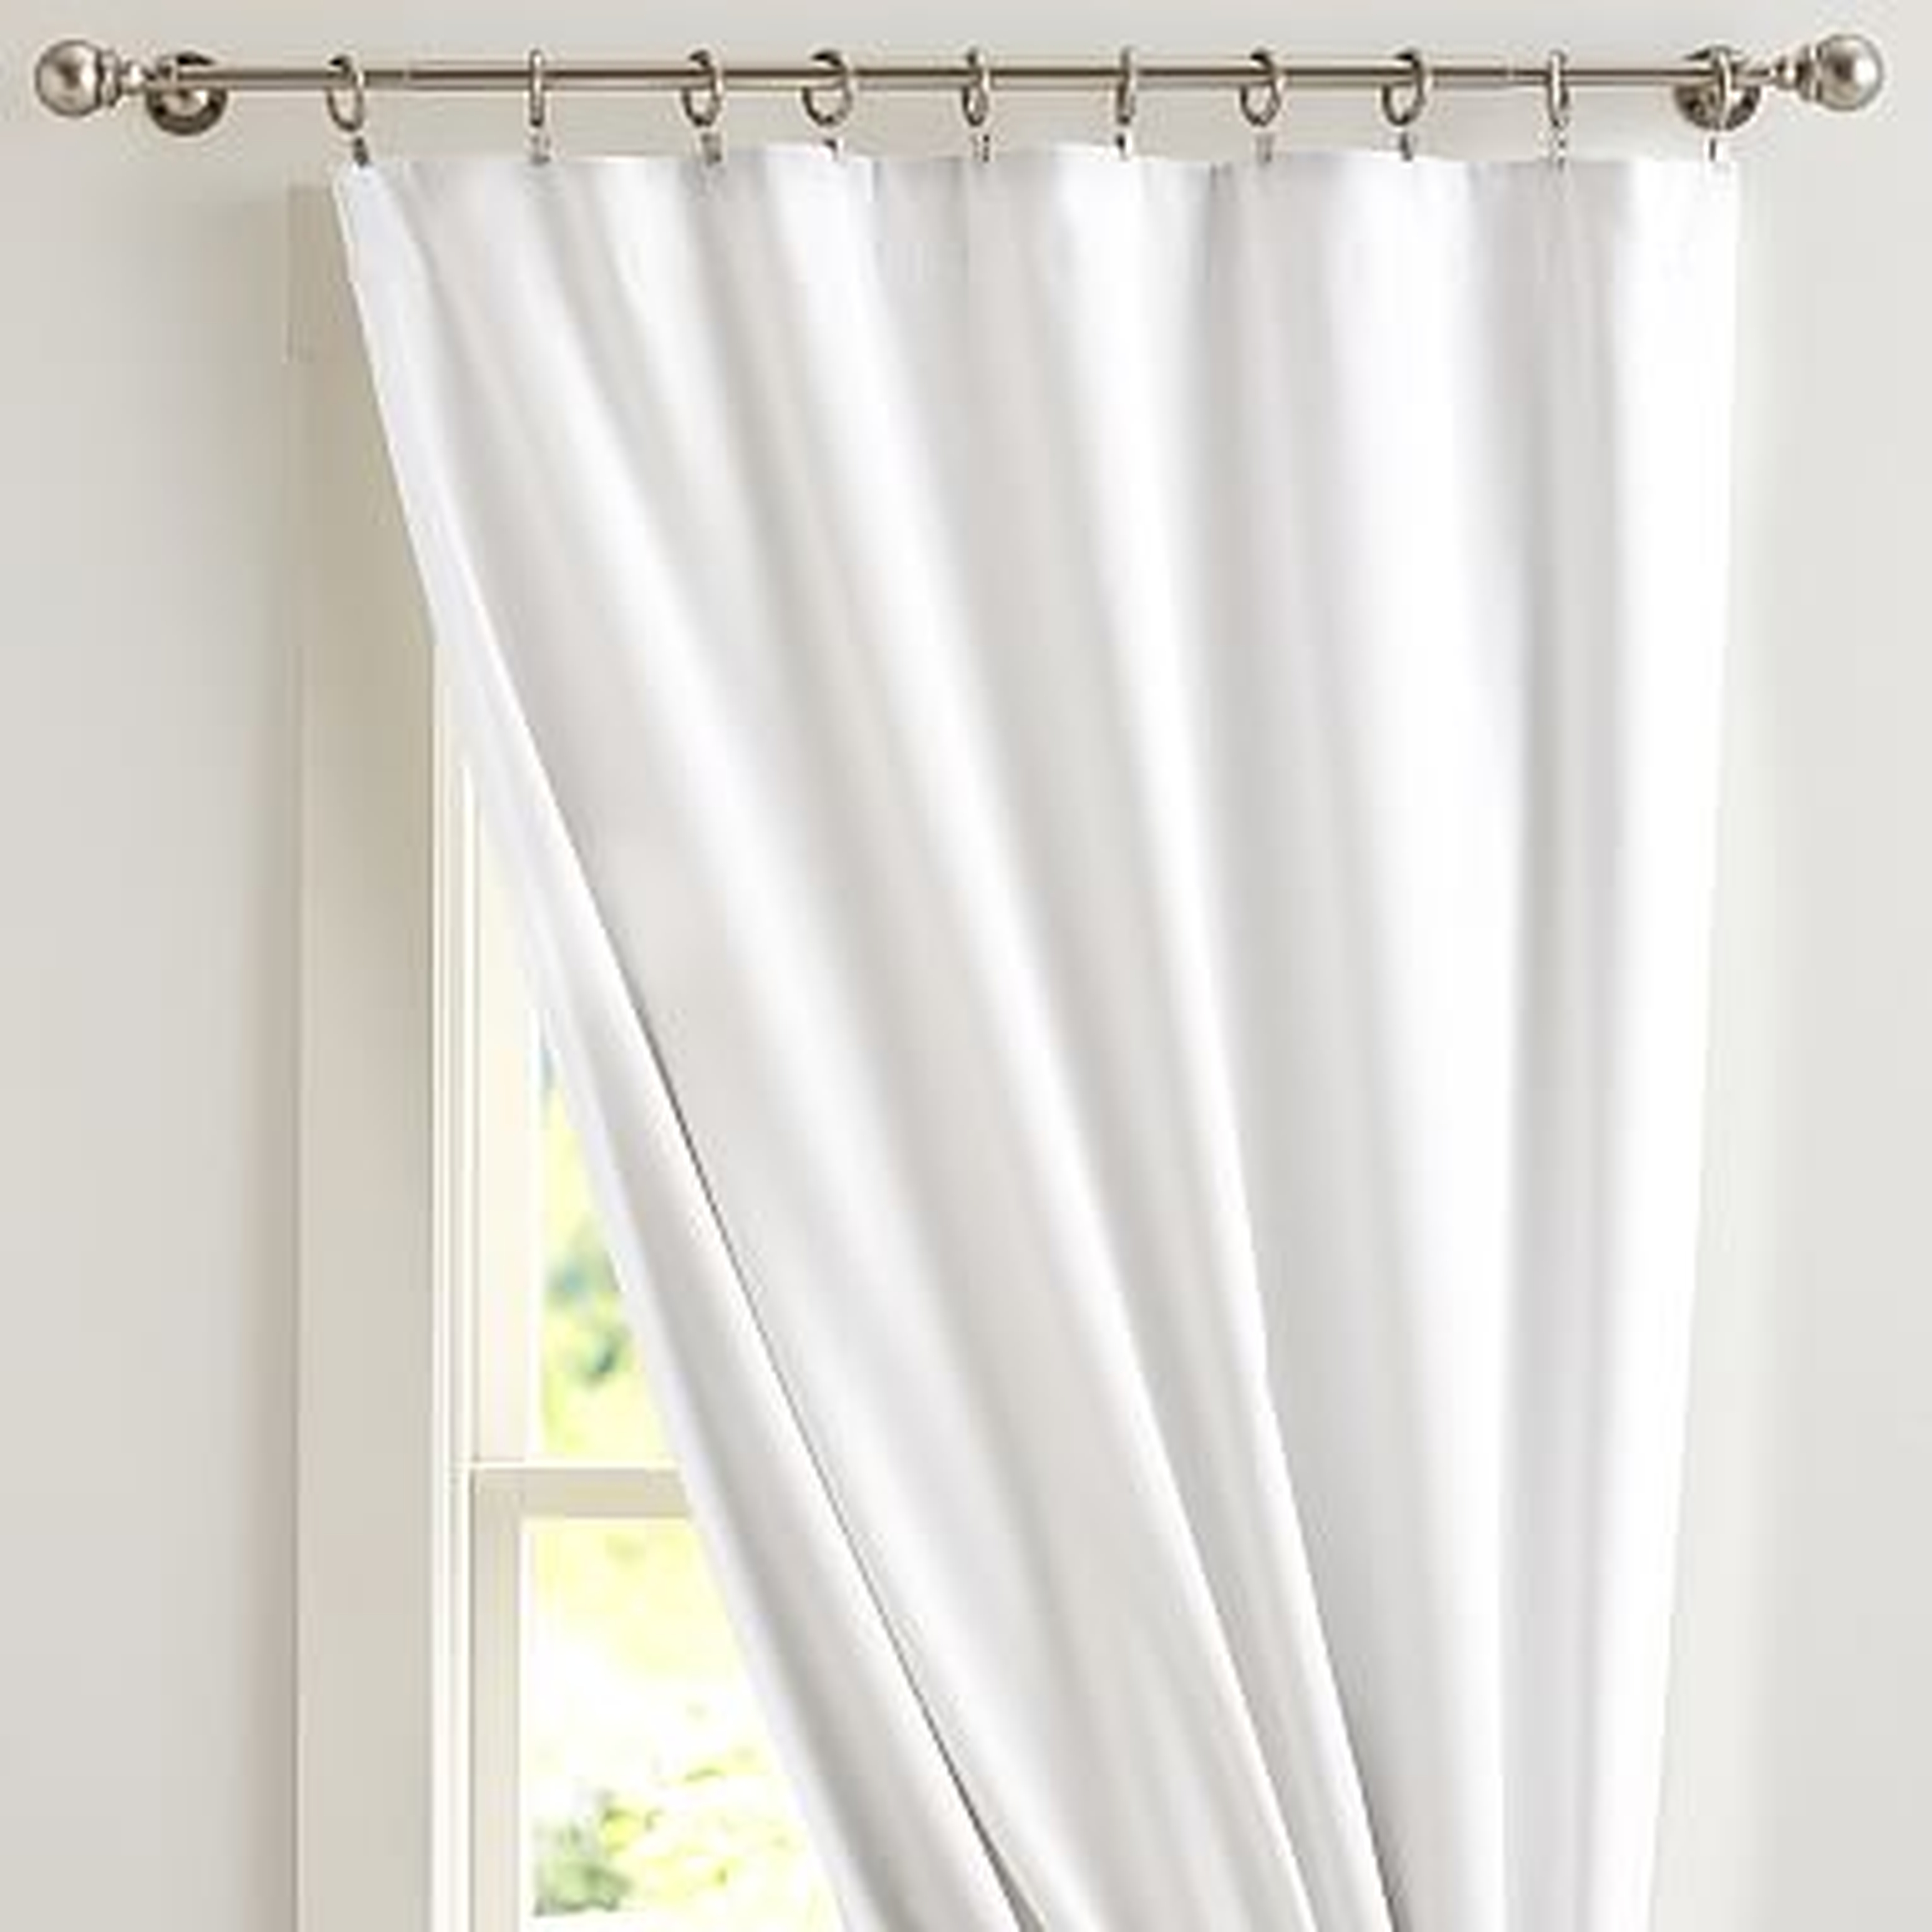 Classic Sailcloth Blackout Curtain Panel, 96", White - Pottery Barn Teen